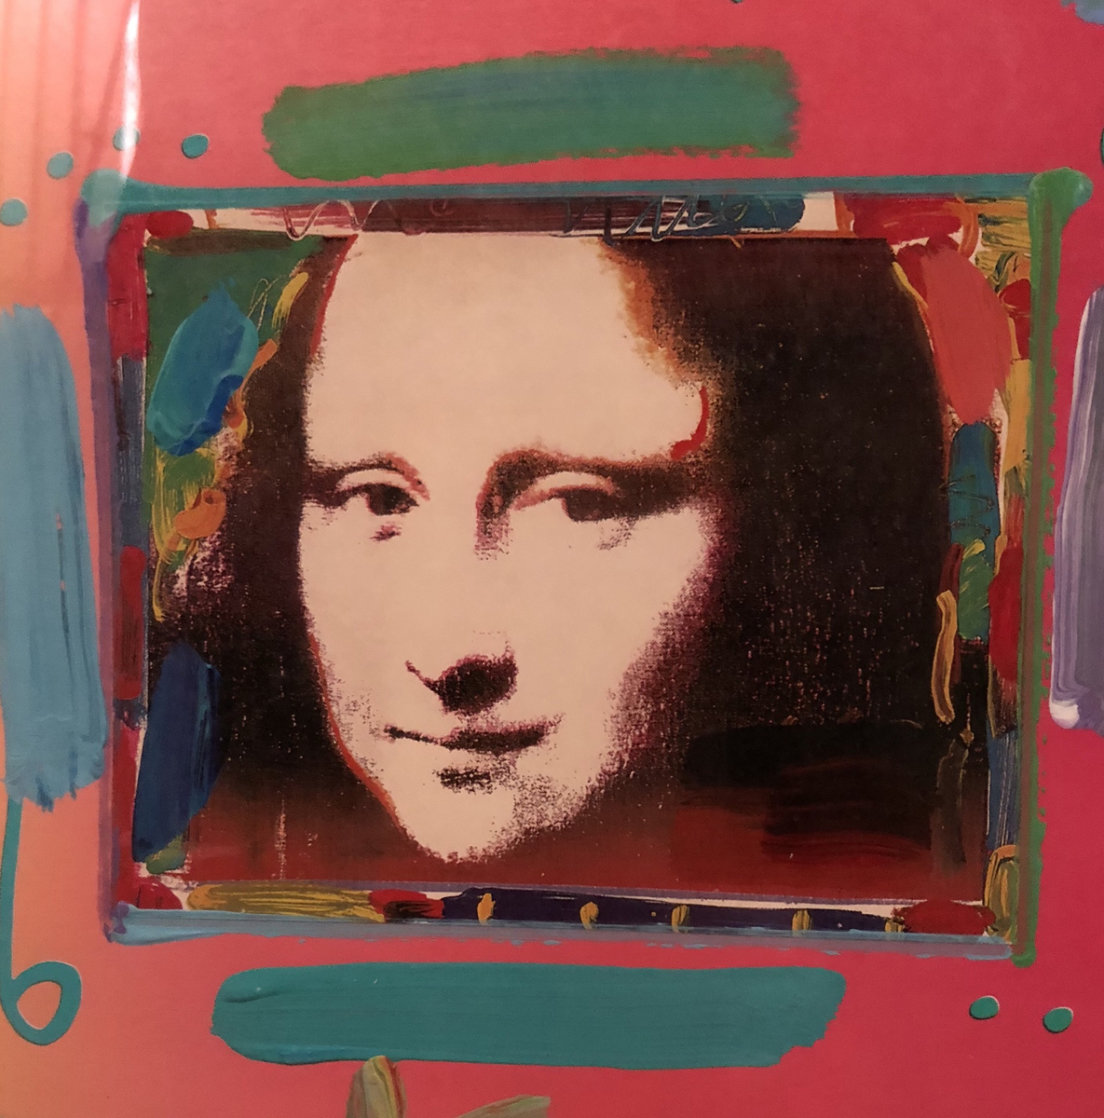 Mona Lisa Collage 2  Unique 20x18 Works on Paper (not prints) by Peter Max